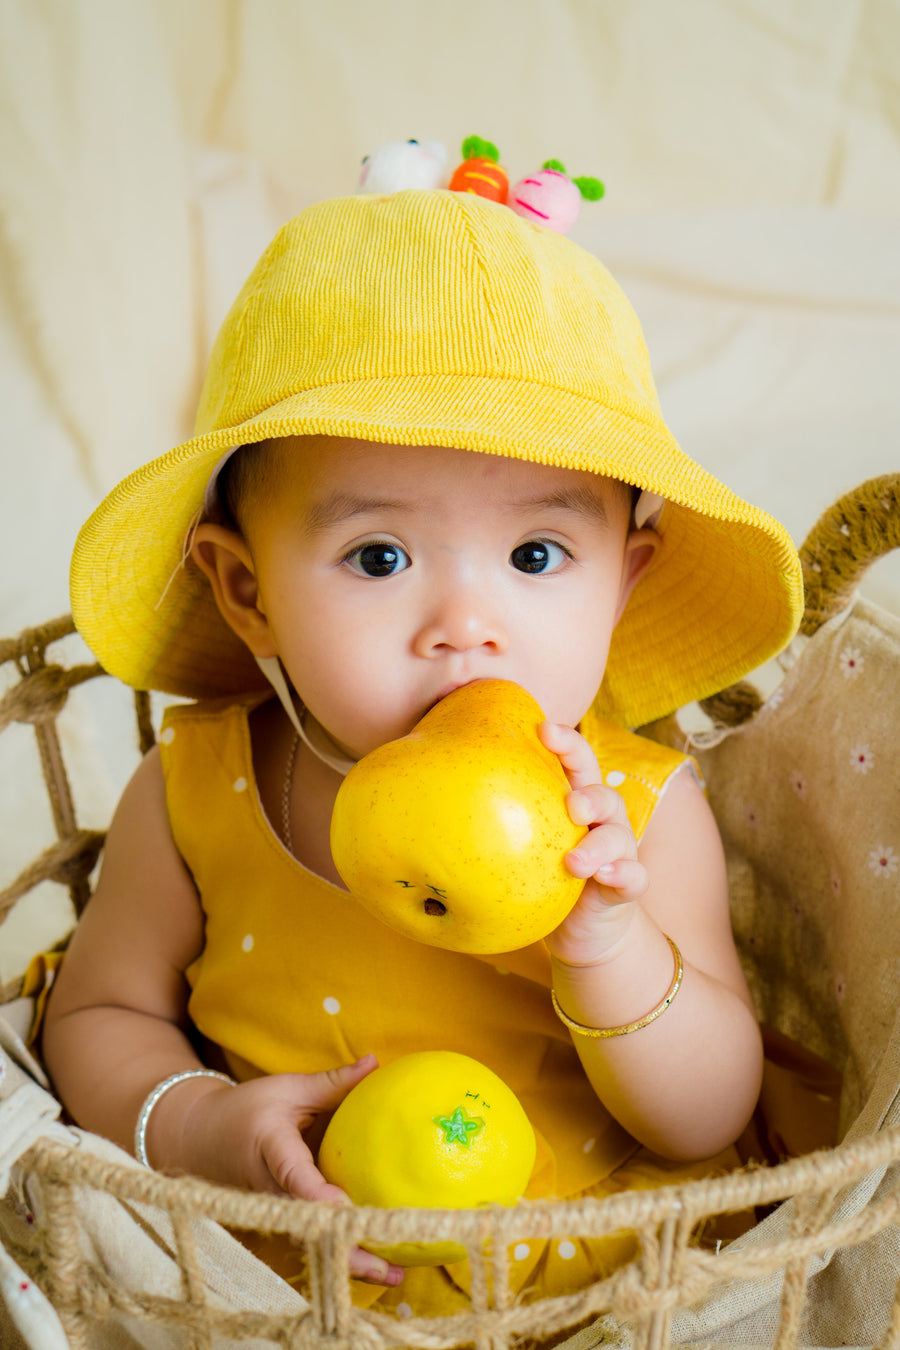 Baby in yellow hat